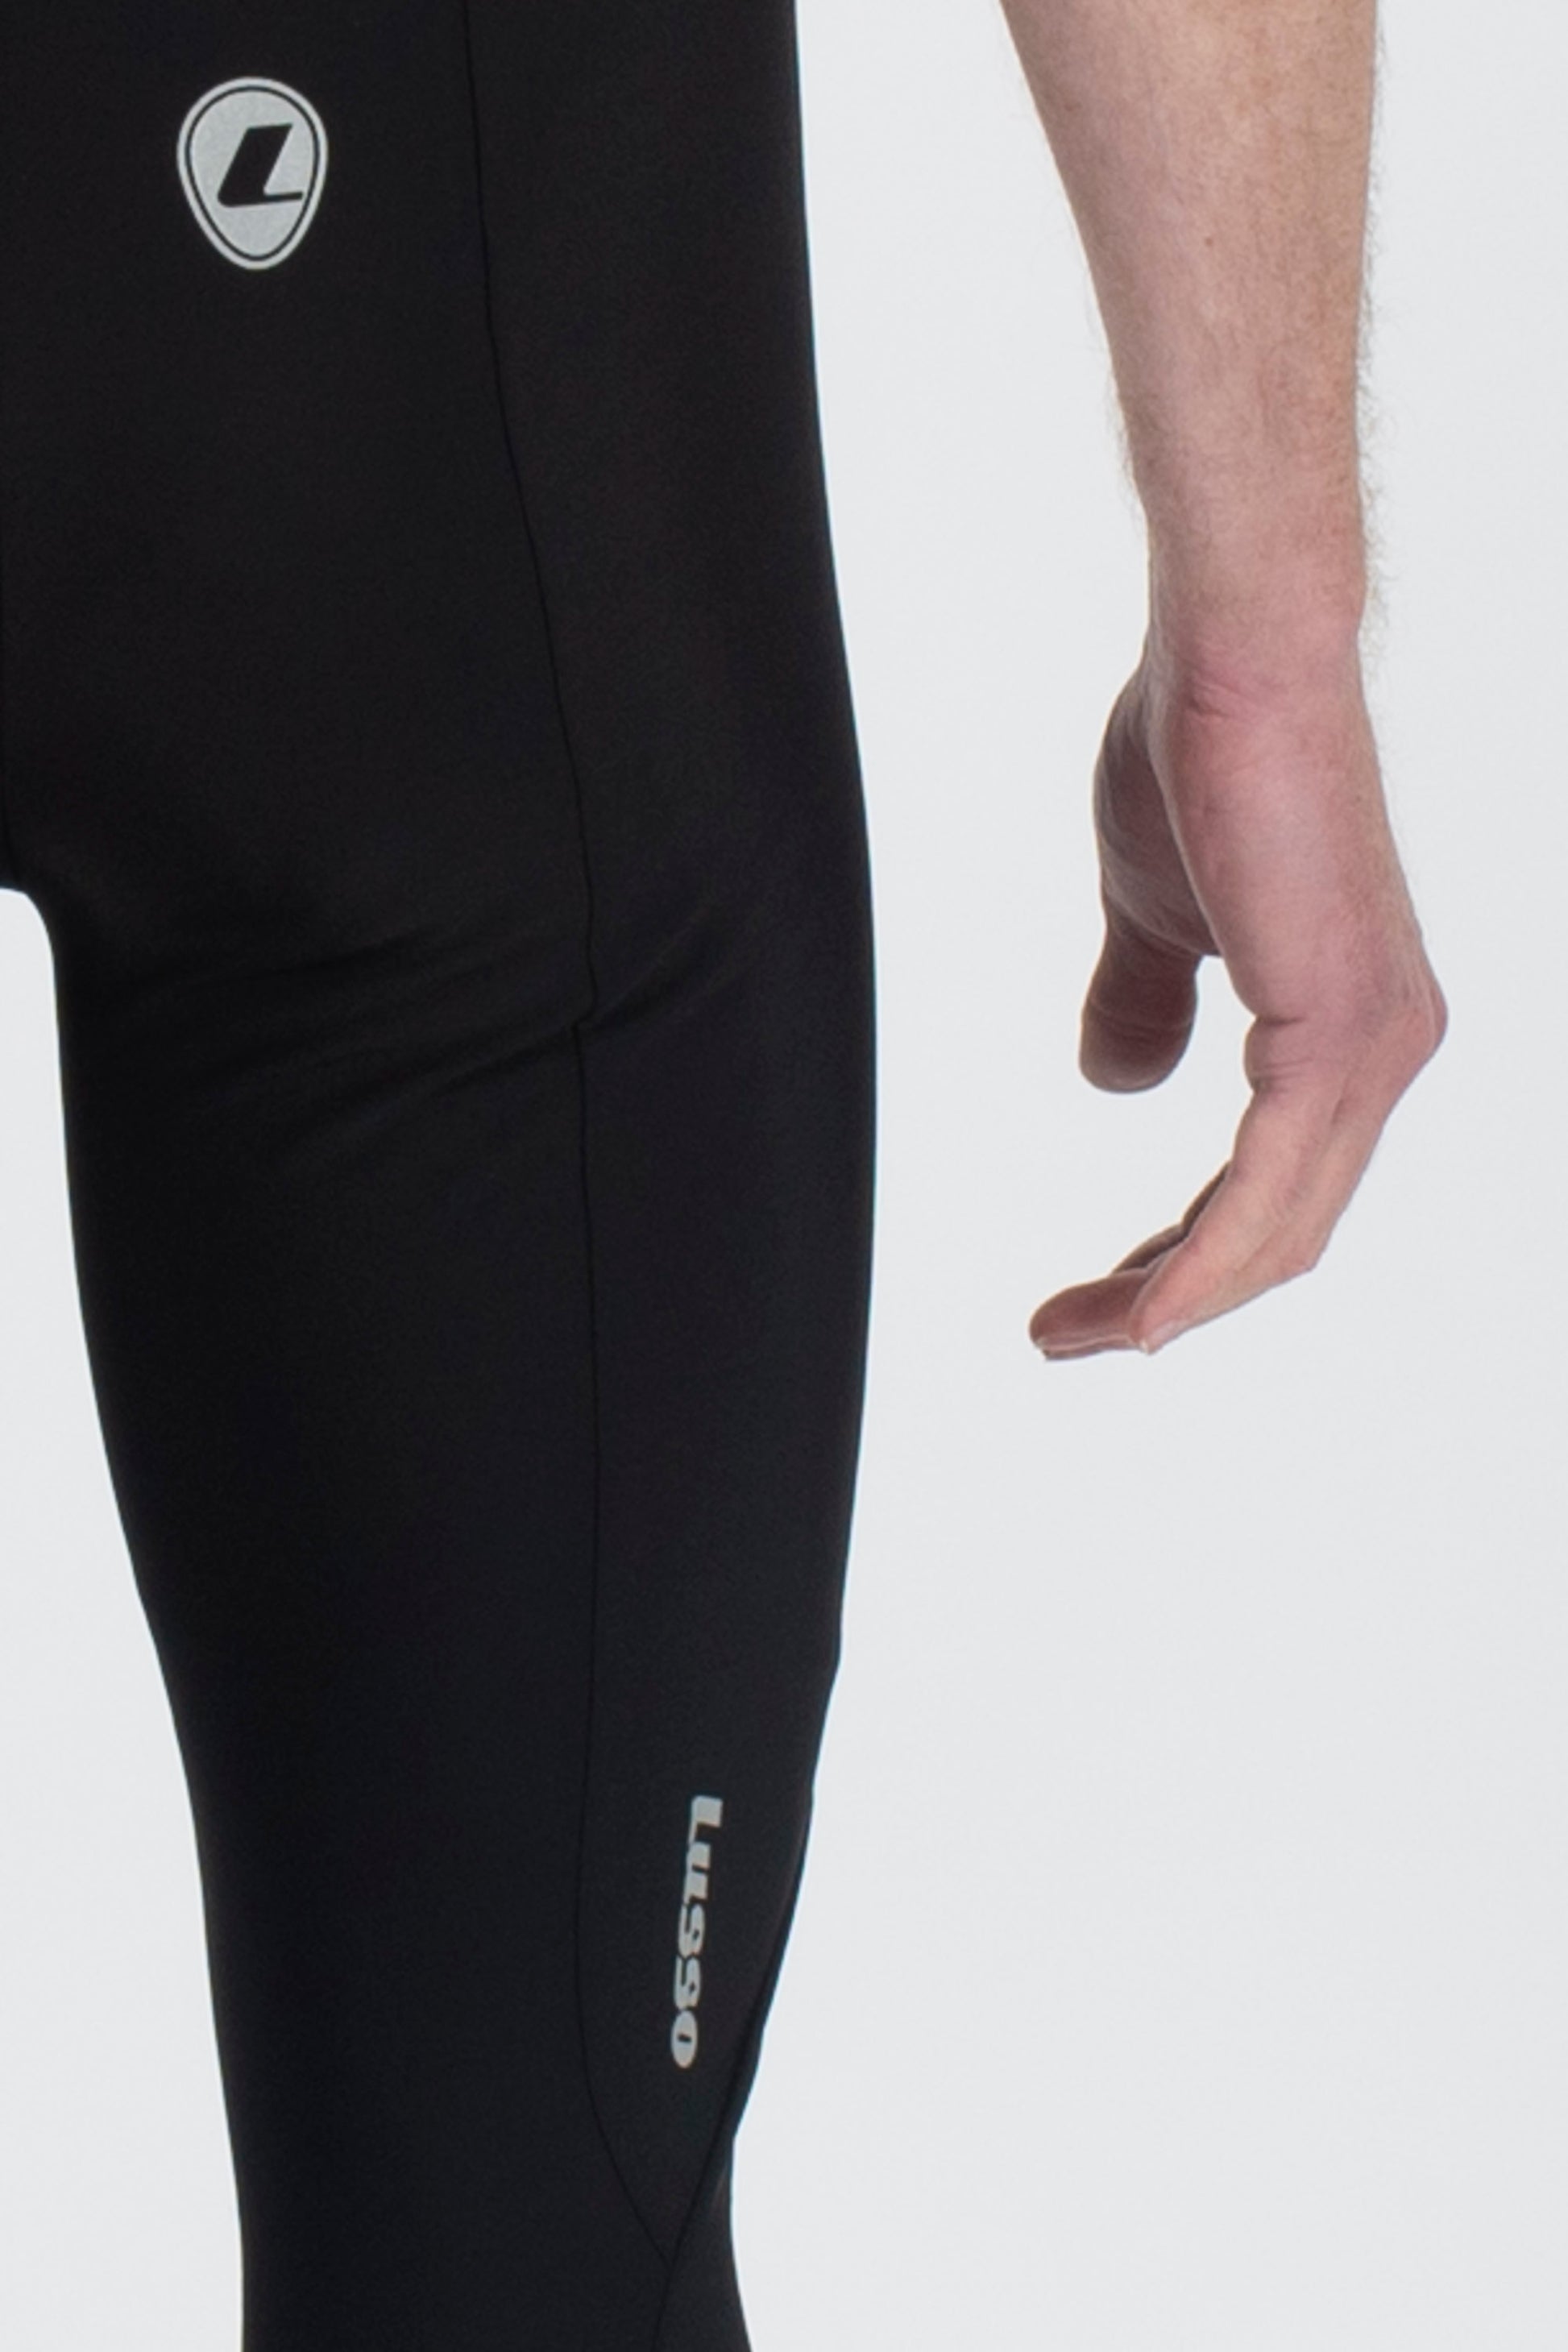 Thermal Roubaix Bibtights - Lusso Cycle Wear